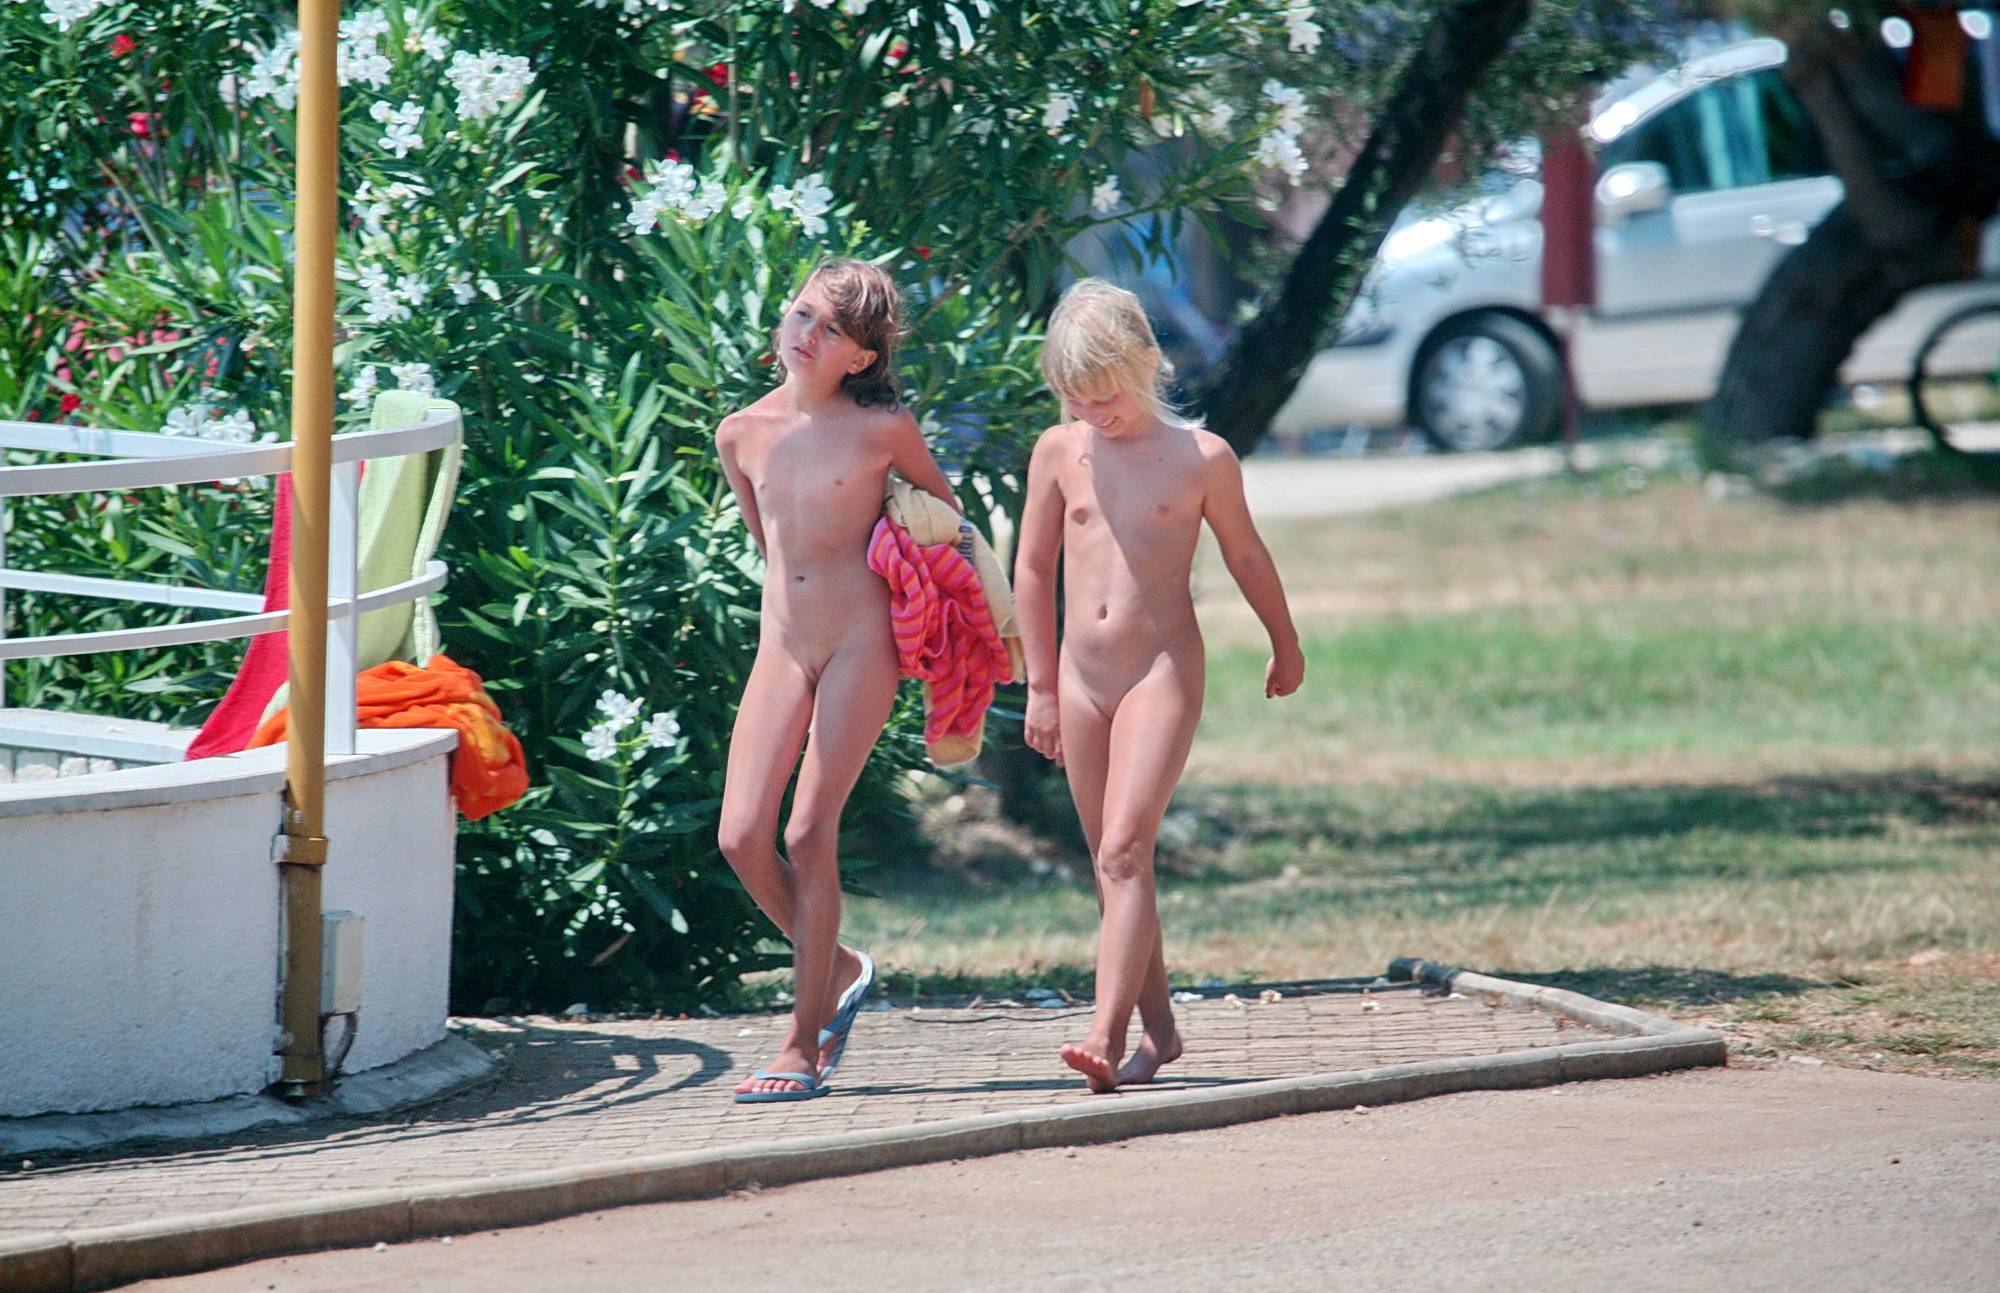 Purenudism Images-Nudist Family and Friends - 3